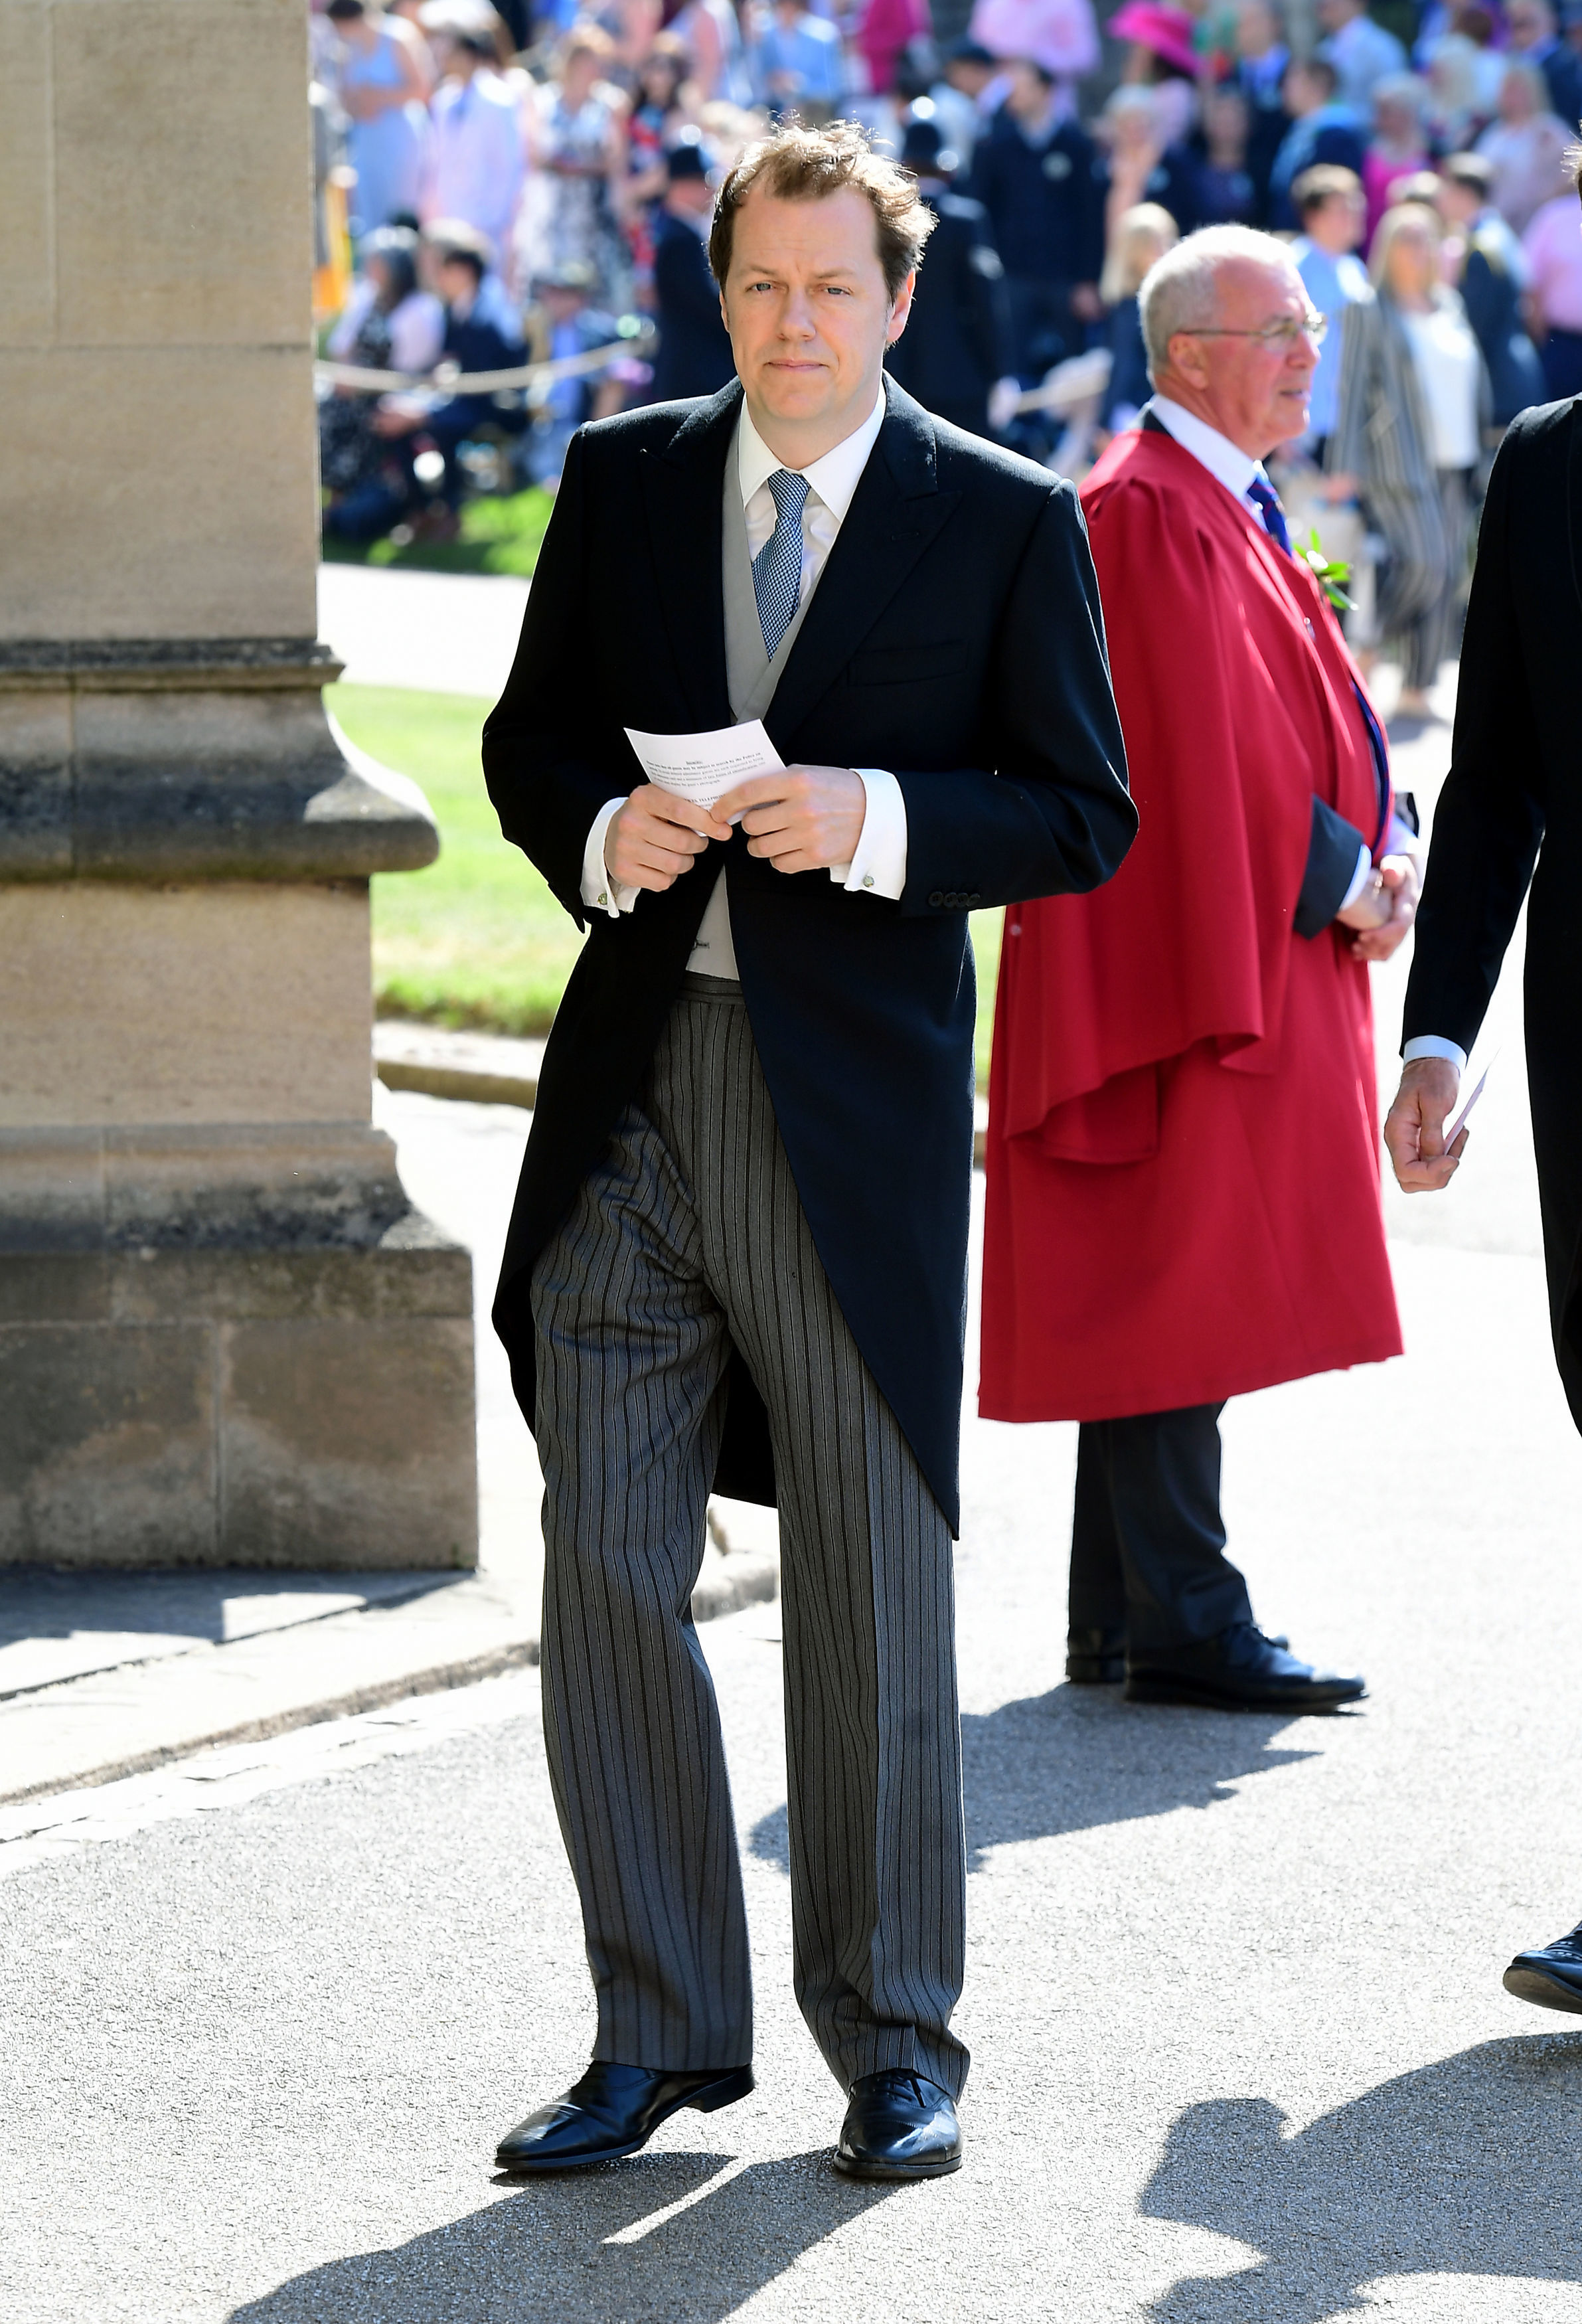 Tom Parker Bowles, son of the Duchess of Cornwall, heads to the chapel (Ian West/PA)